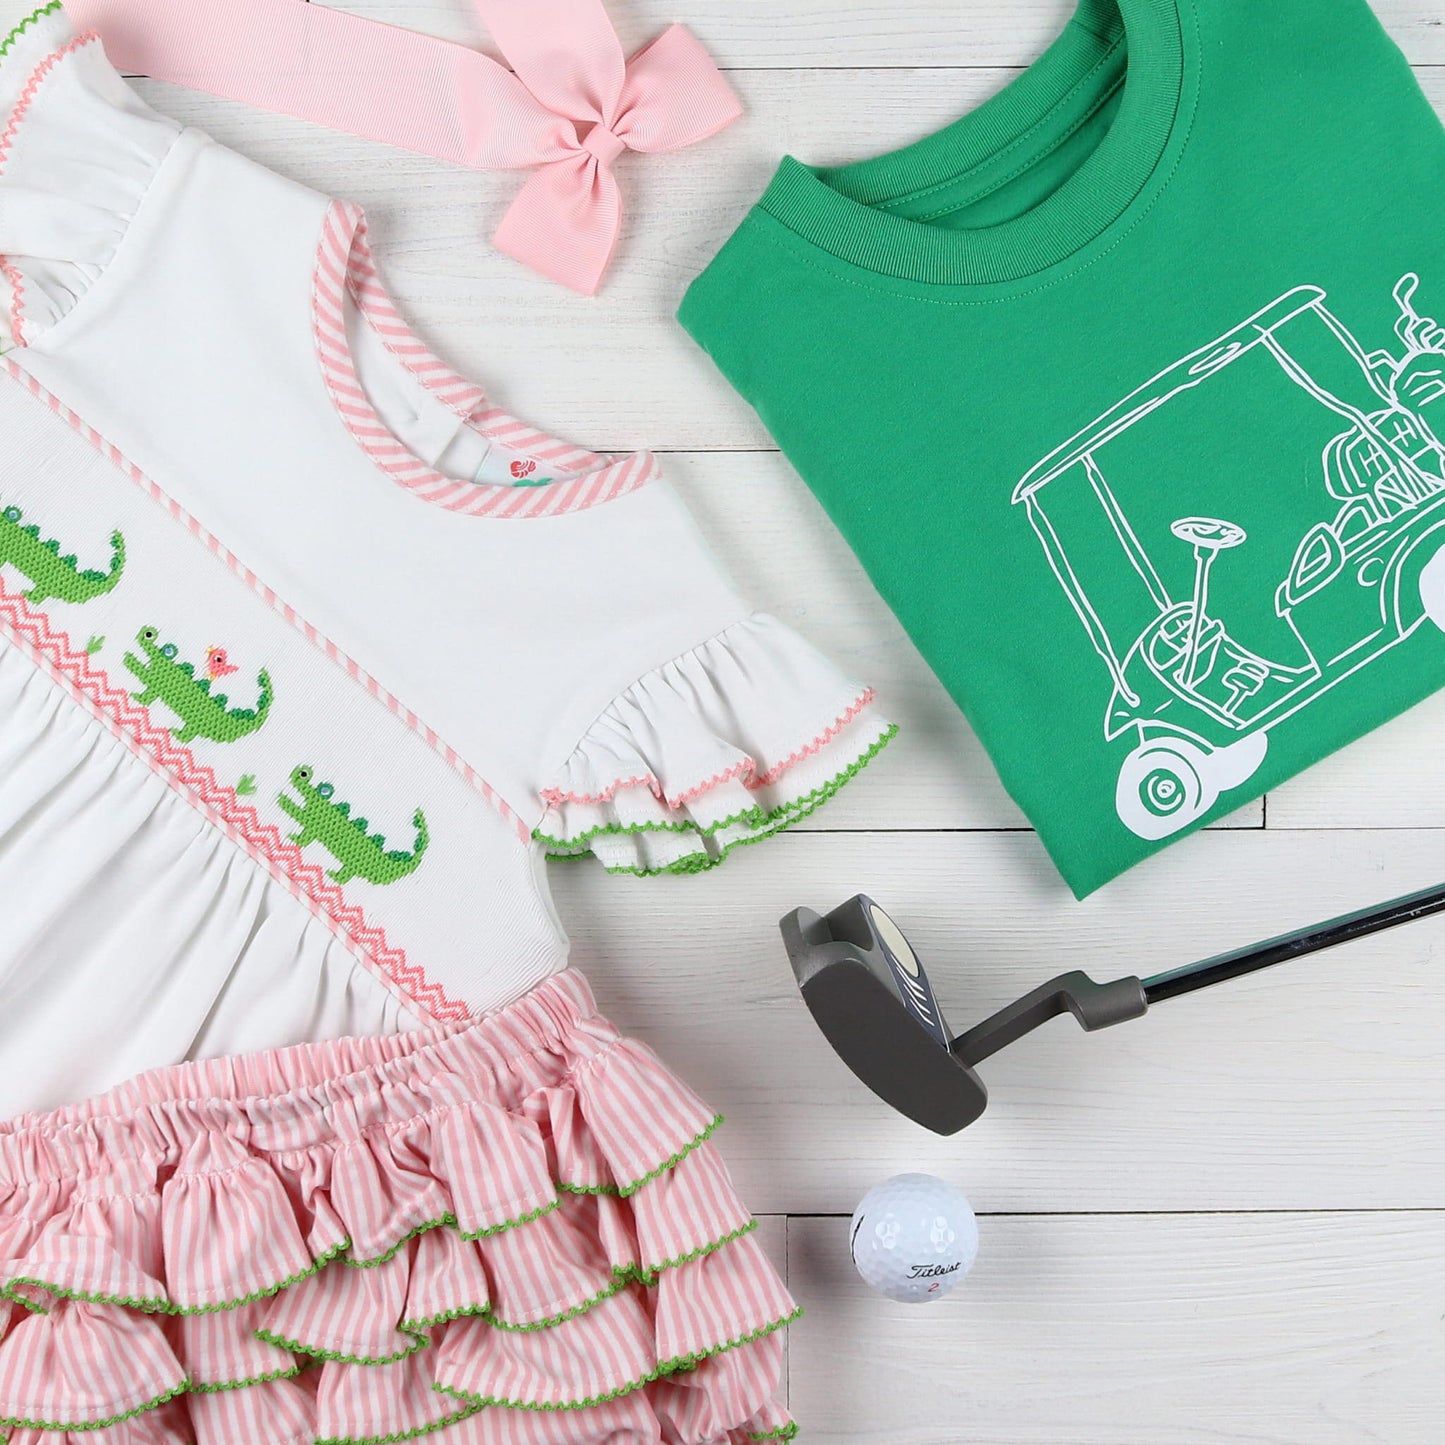 flatlay of green shirt with golf club and pink bow